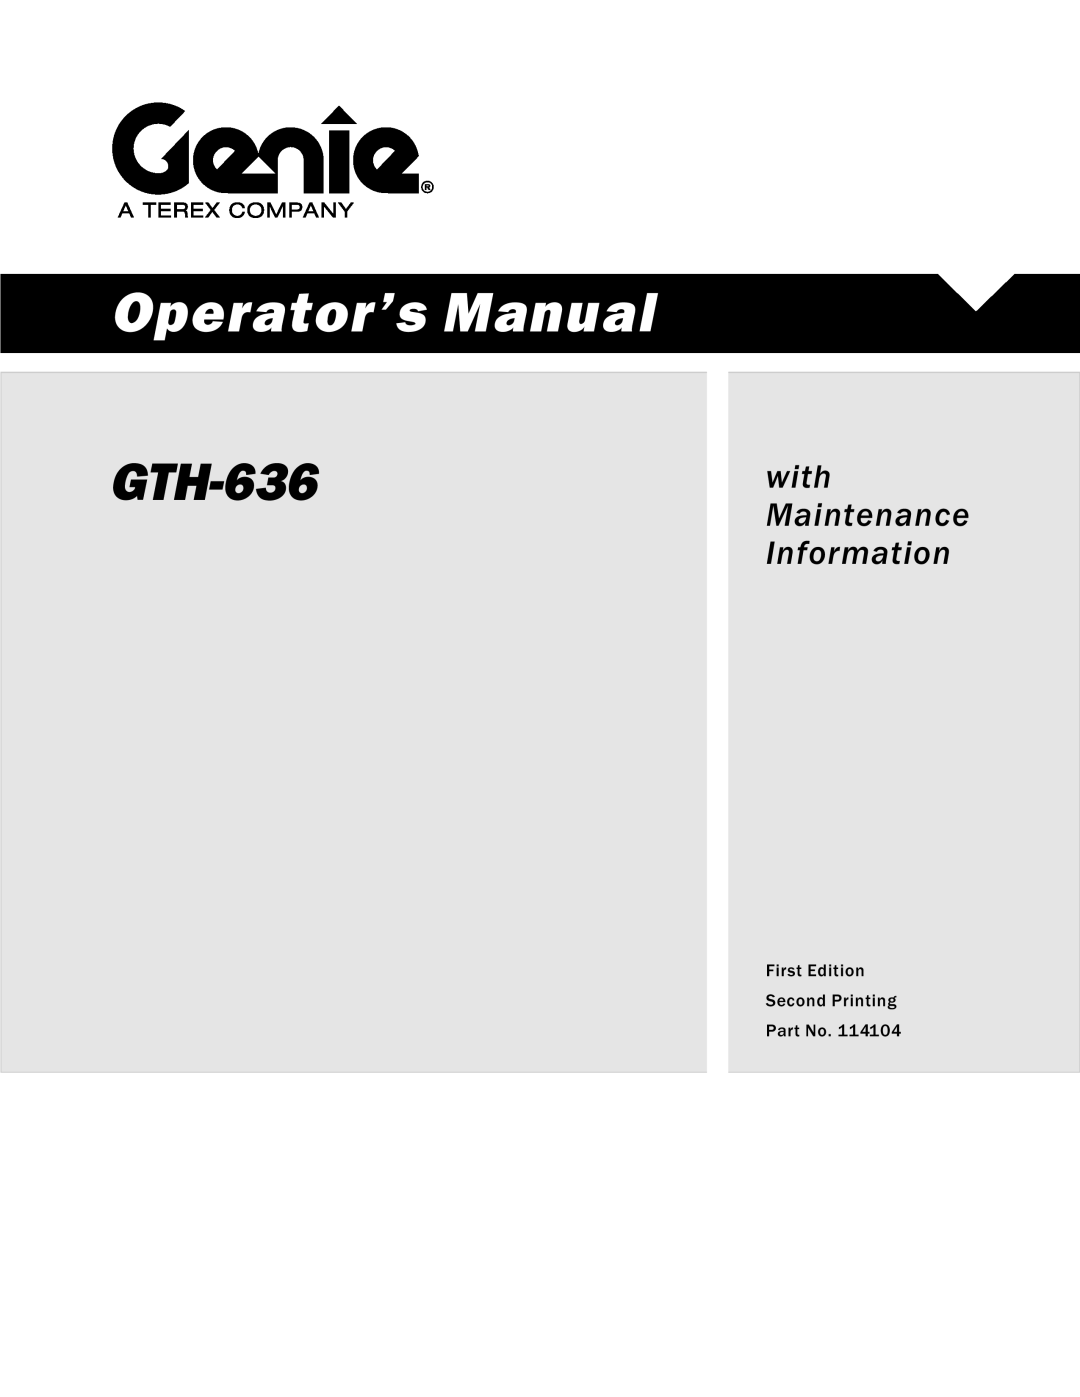 Genie GTH-636 manual Operator’s Manual, with Maintenance Information, First Edition Second Printing Part No 